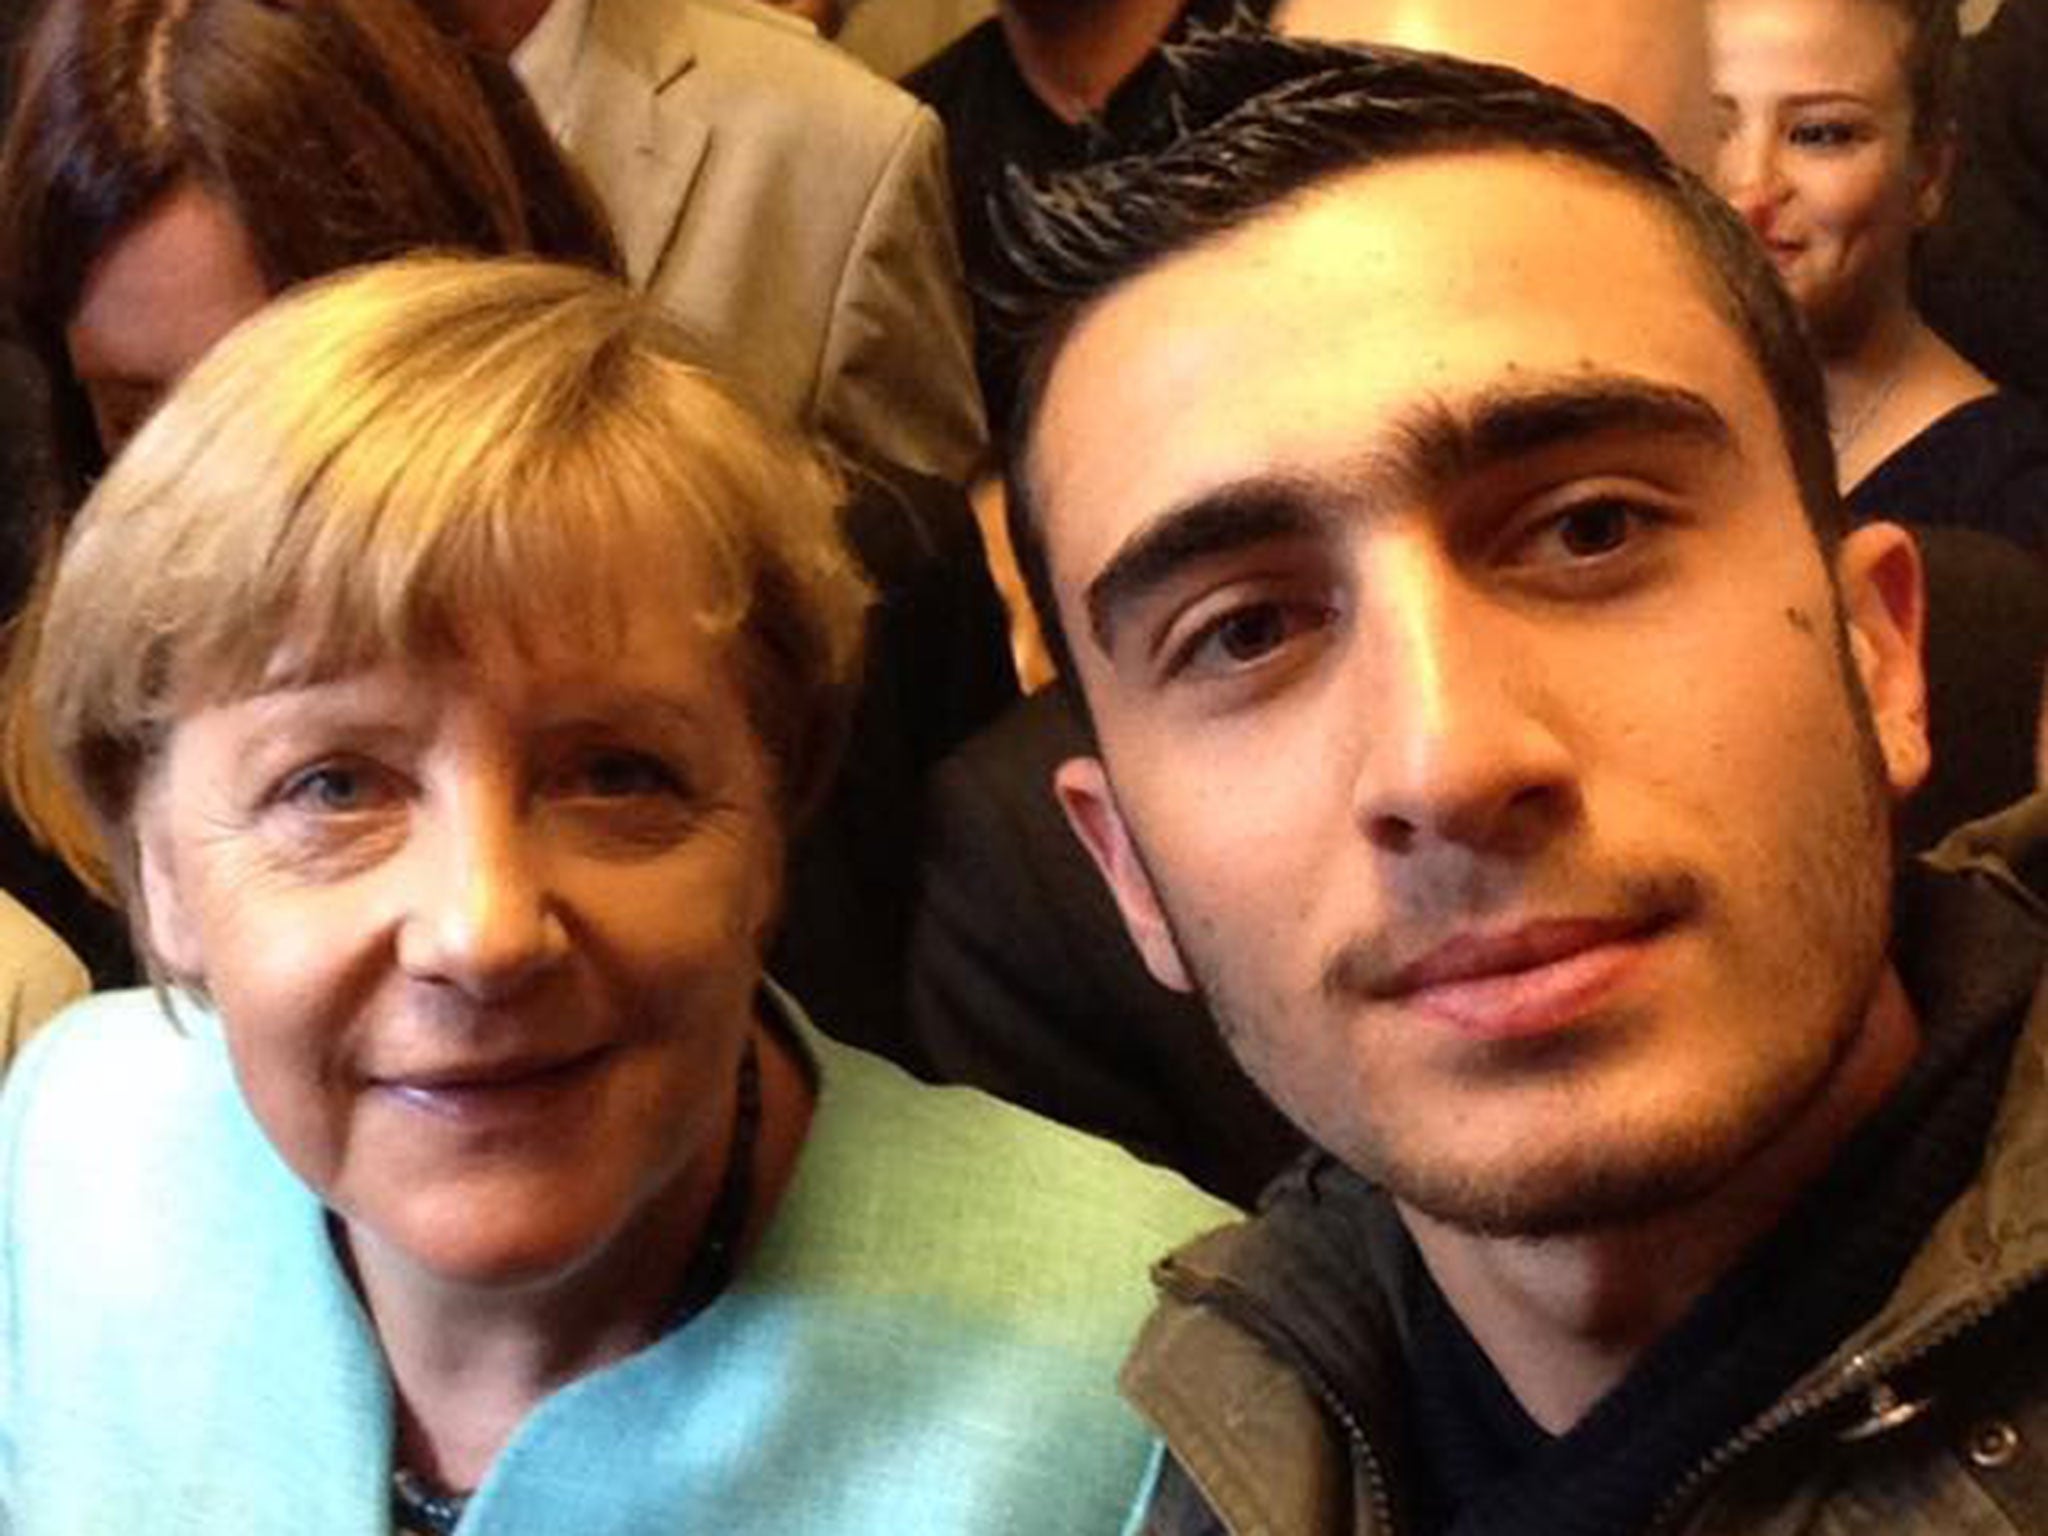 Anas Modamani, a teenage Syrian refugee, took a selfie with Angela Merkel when she visited his shelter in Berlin on 10 September 2015